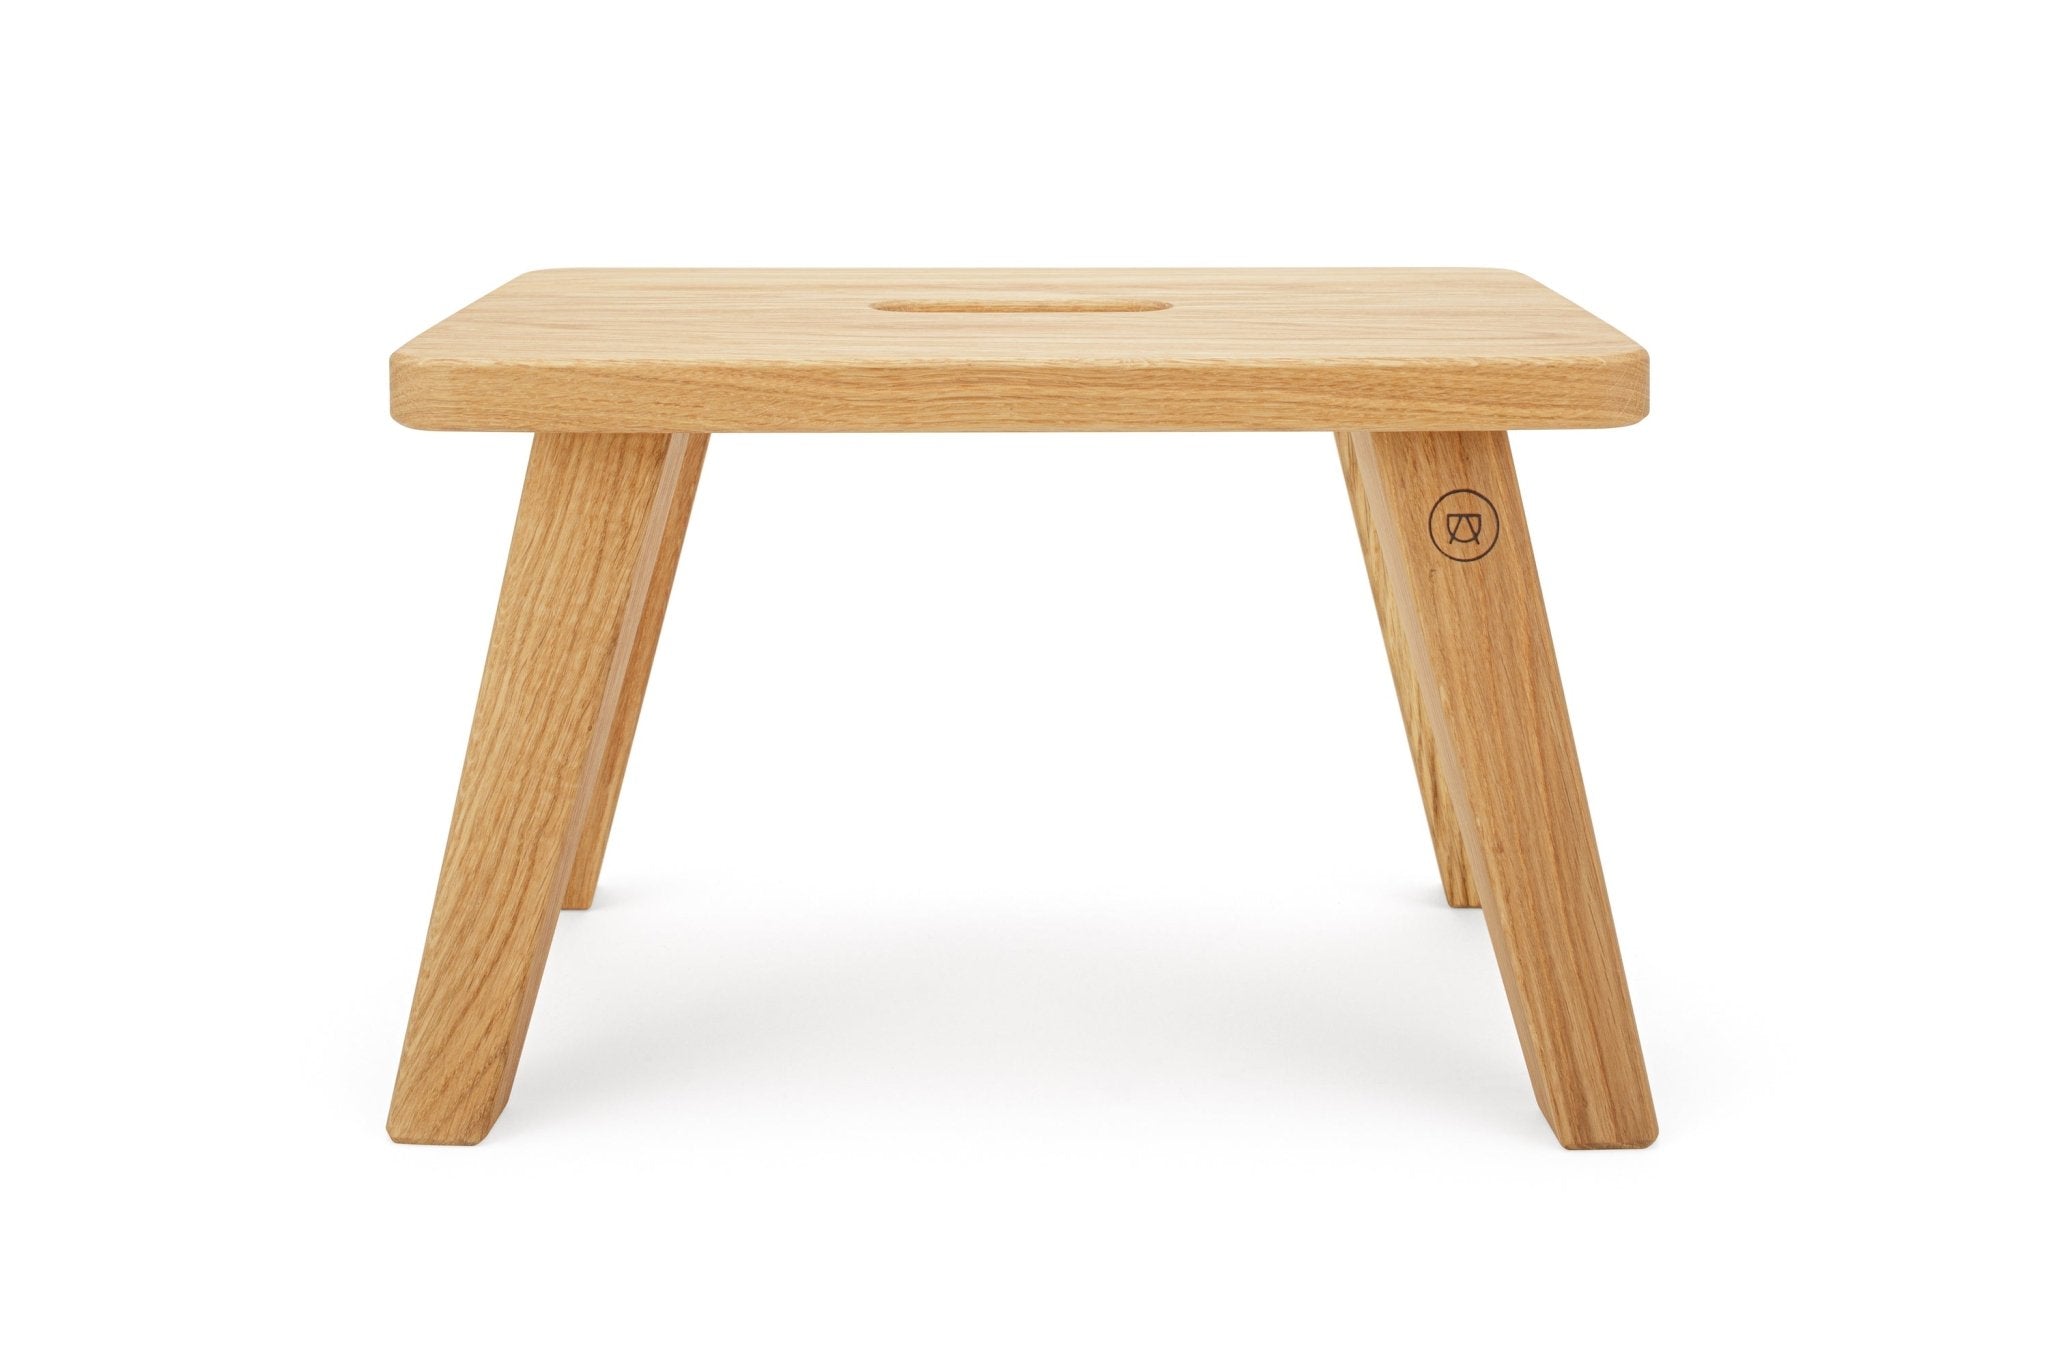 Robust wooden stool made of oak wood “Emil” in a warm honey look